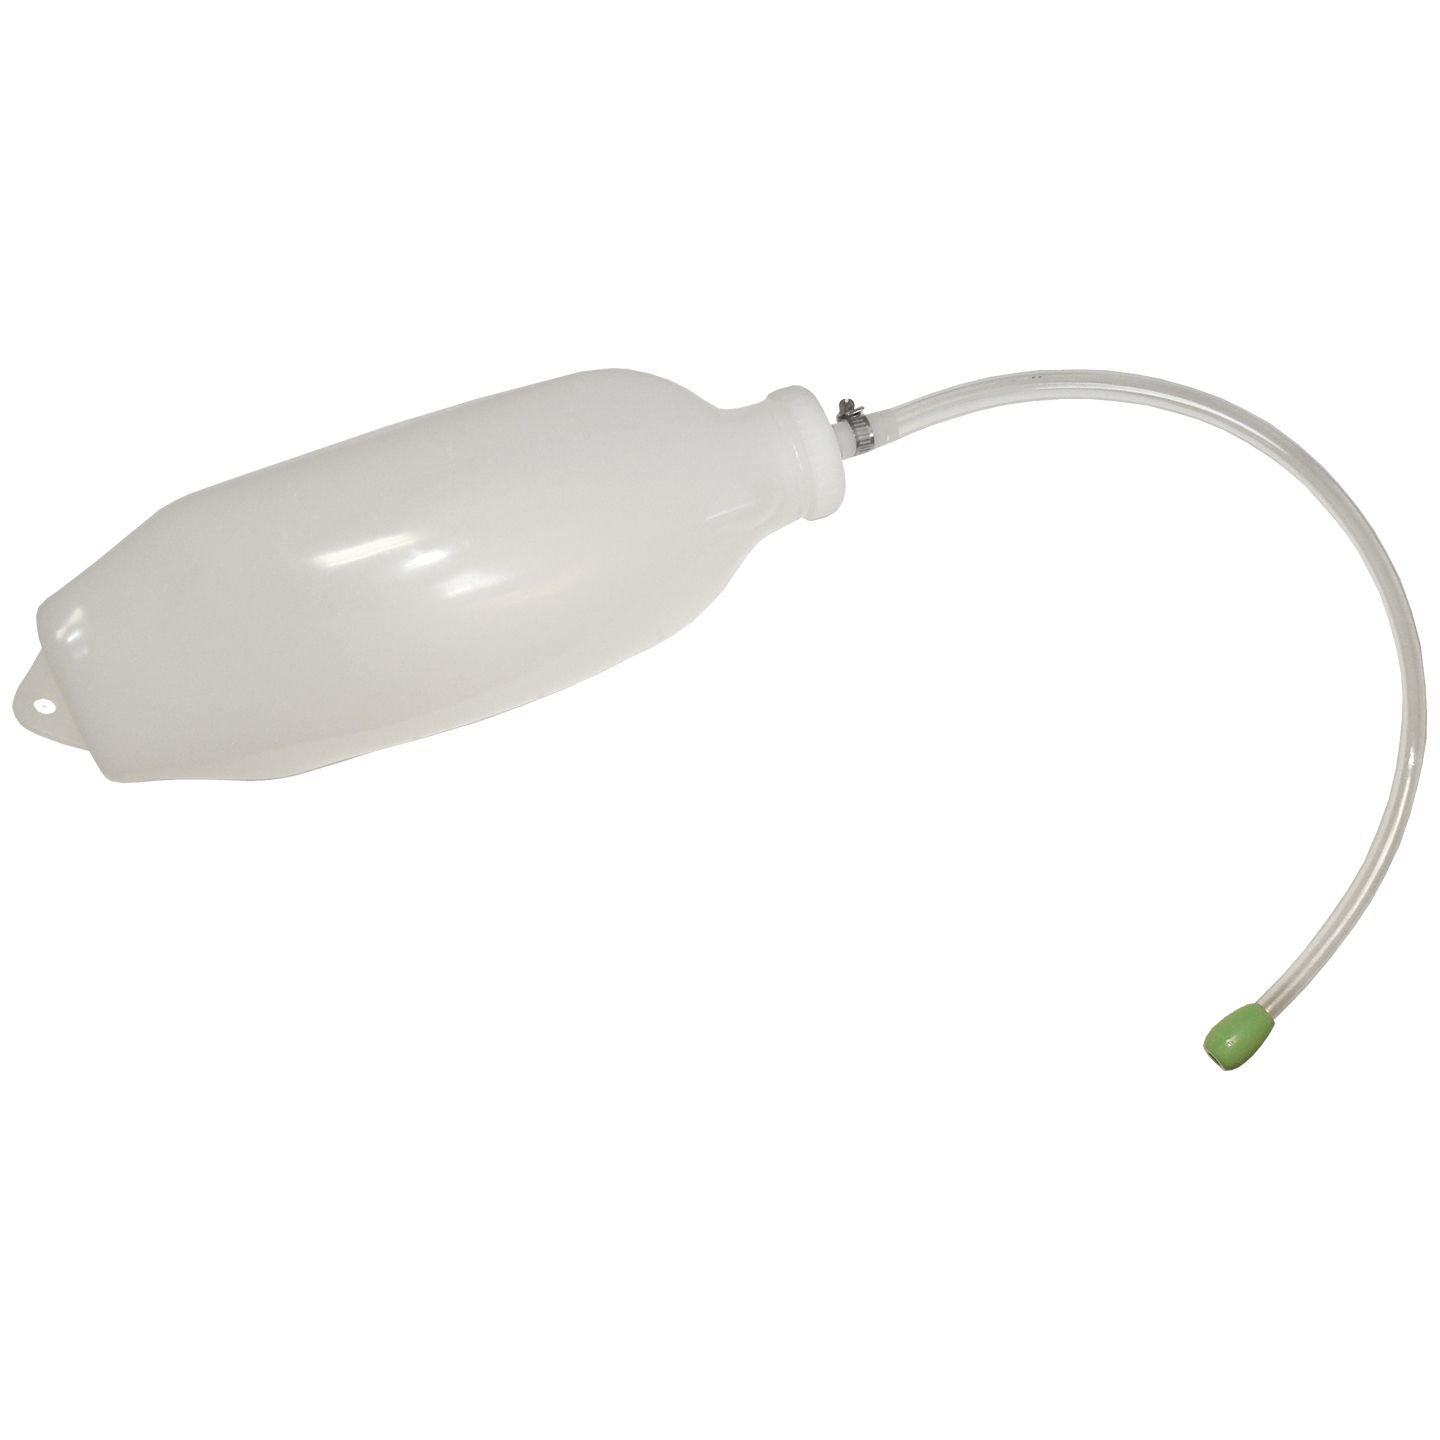 Speedy Calf Drencher Replacement Cap & Probe Assembly 